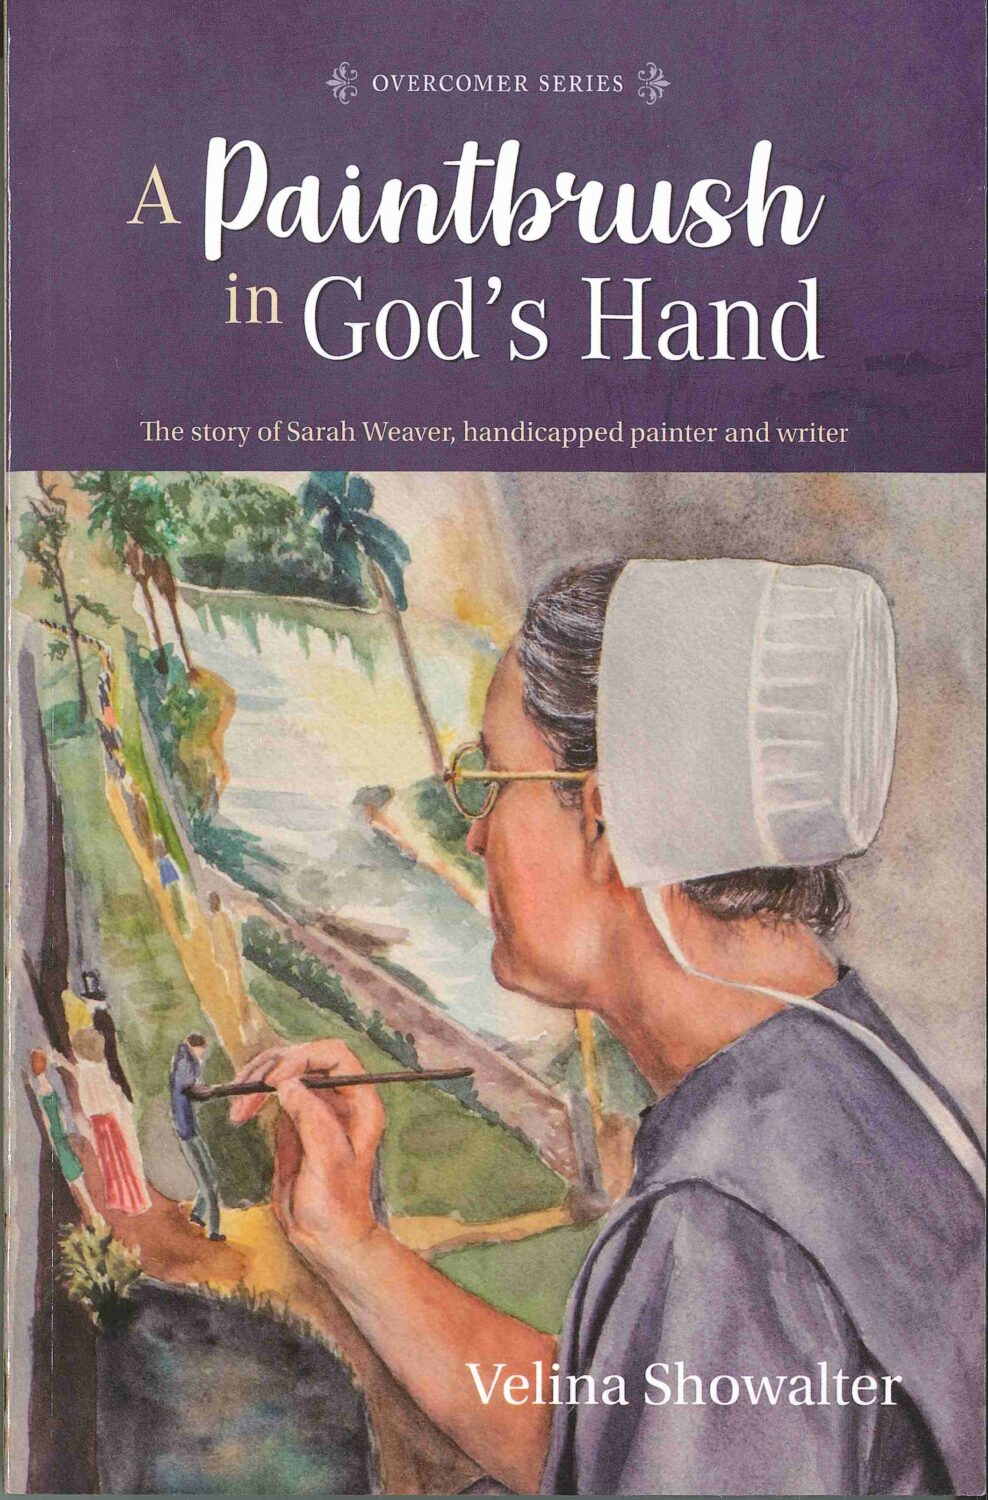 The Bible Paint with Water Book and Paint Brush – Hearty Household